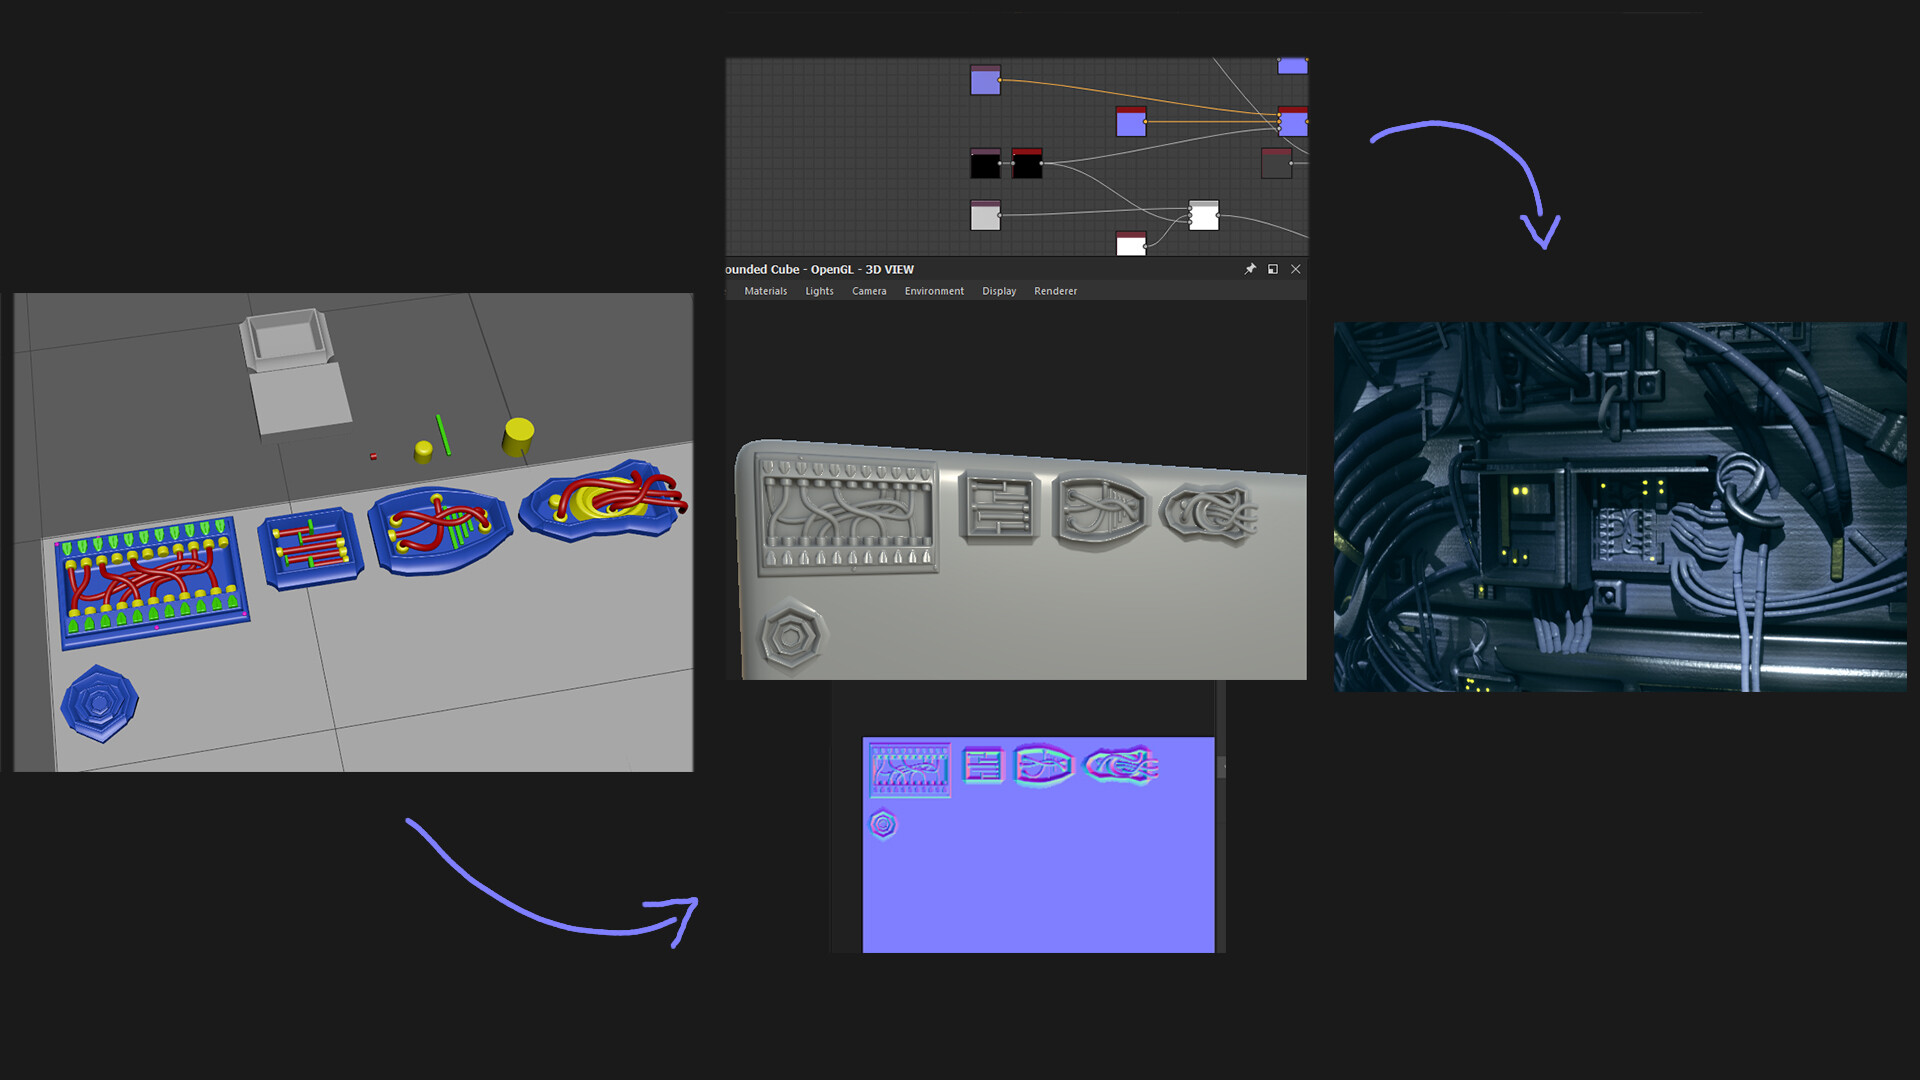 Few screenshots overlaid in one picture. To the left: 3D viewport shot from Maya. Shows 3D, highpoly, hardsurface details. In the middle: those same 3D pieces loaded into Substance Designer and baked onto flat planes, producing 2D textures. To the right: the baked normal details used on some of the geometries in the scene.